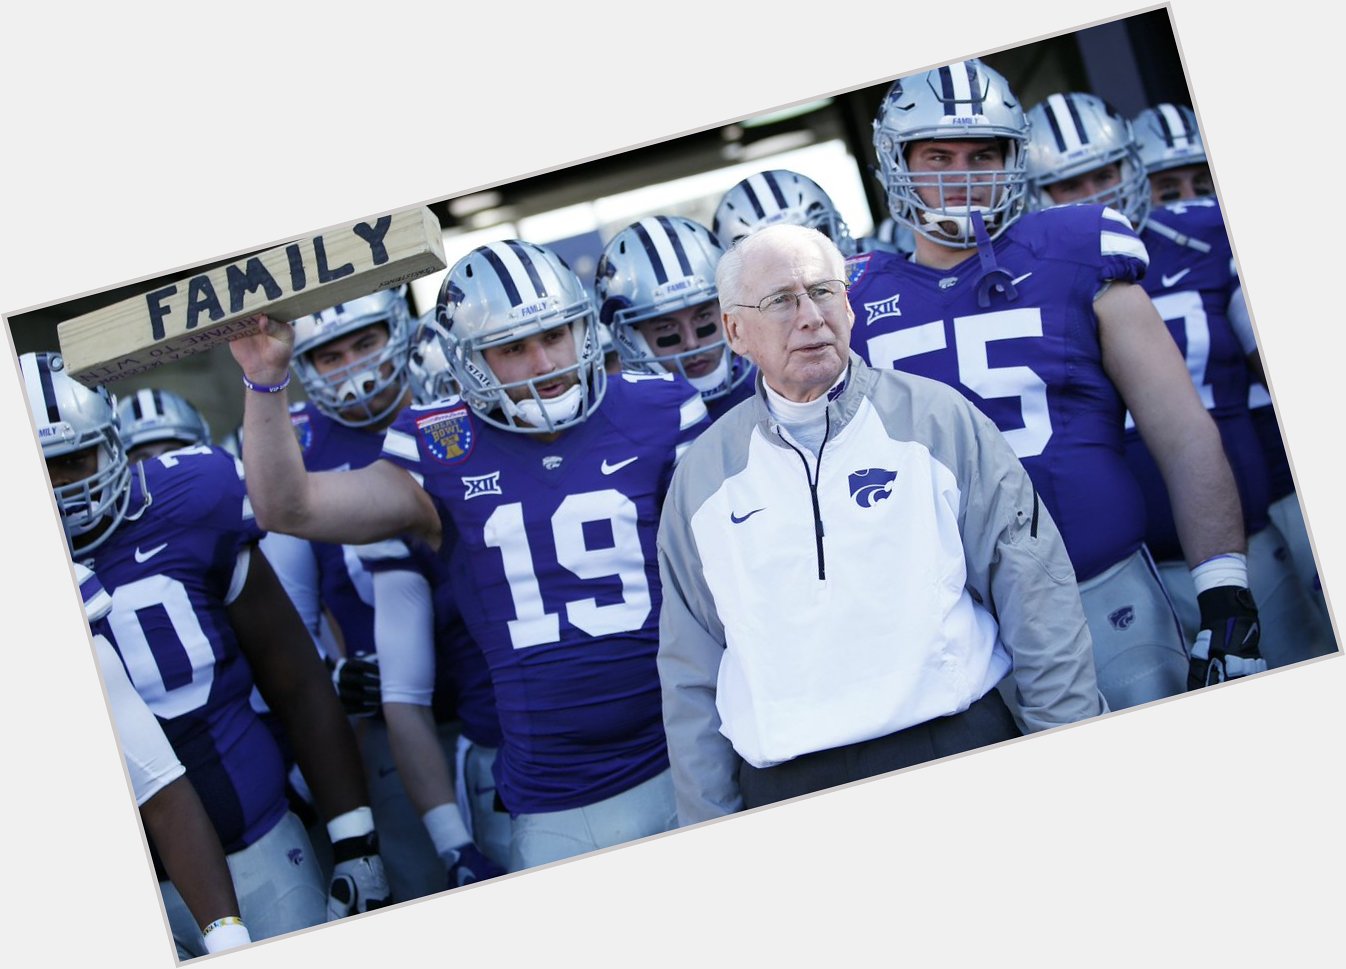 Happy Birthday to Bill Snyder who turns 78 today! 